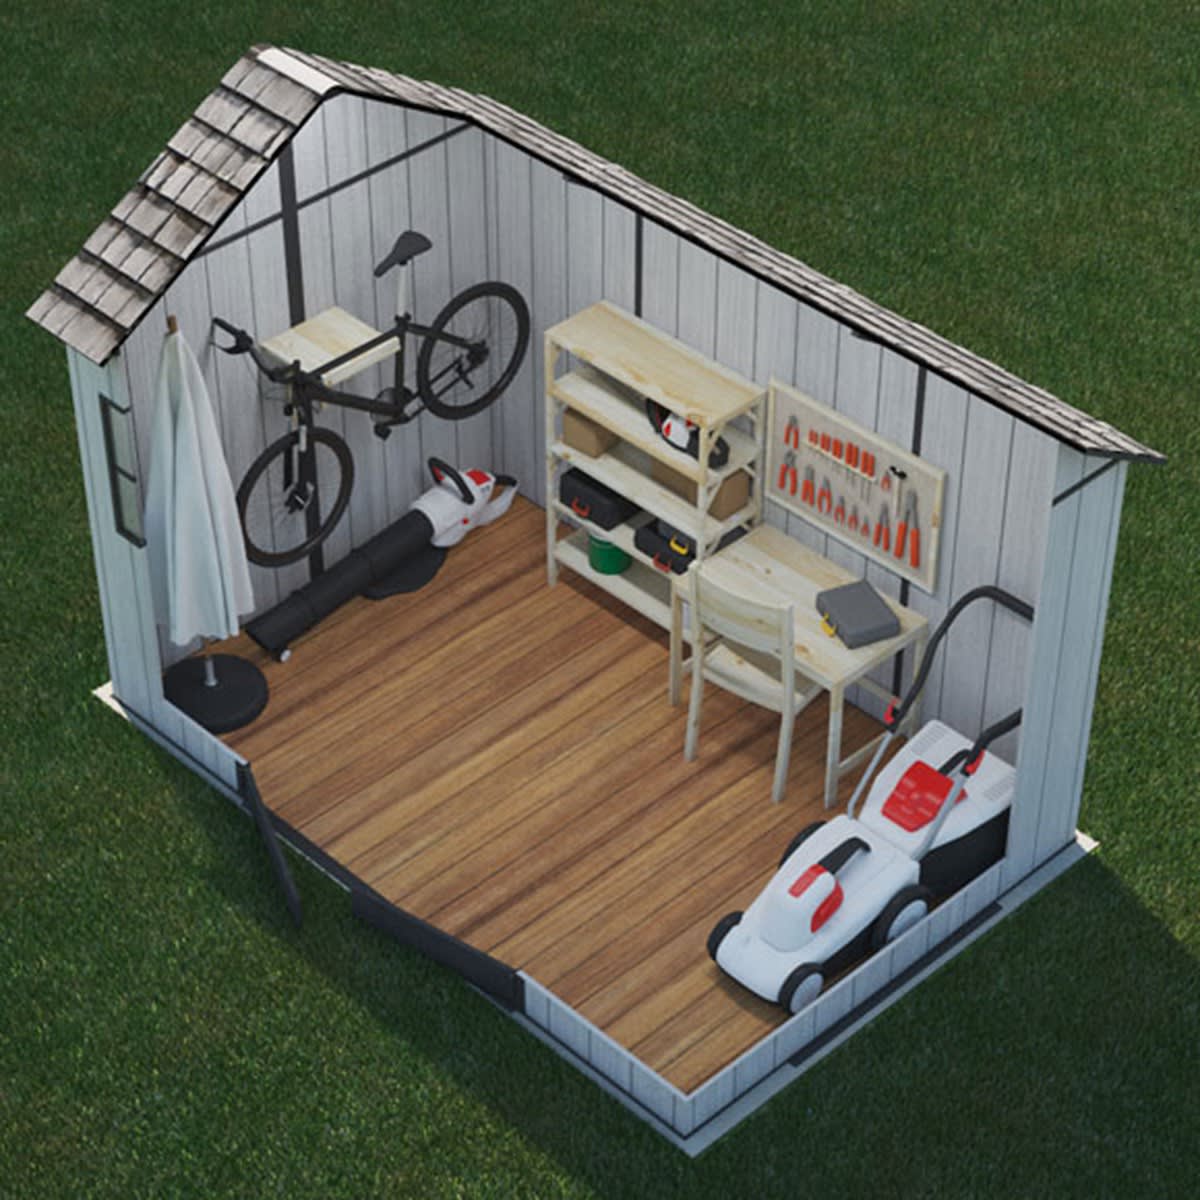 GARDEN SHED OAKLAND THICKNESS 20MM EXTERNAL DIMENSIONS 210X342X254H FLOOR INCLUDED